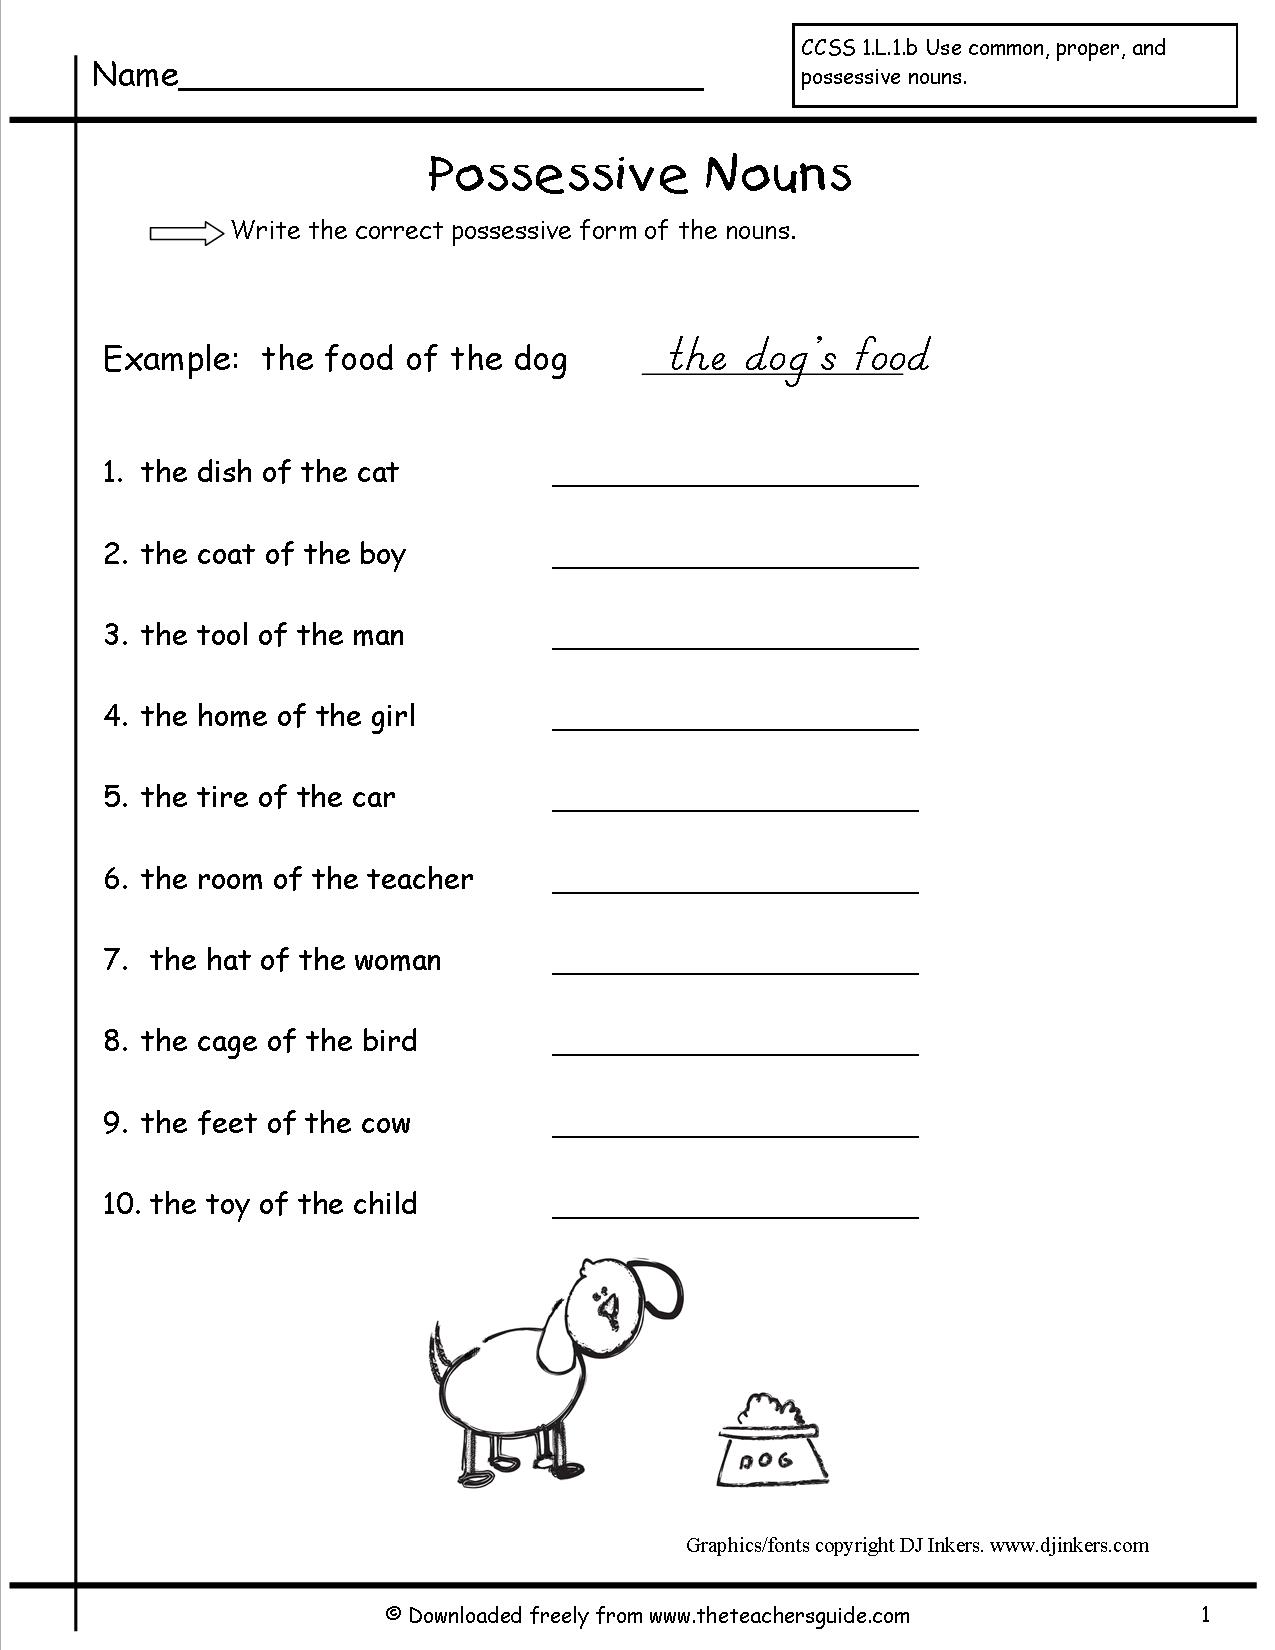 Worksheet On Possessive Nouns With Answers